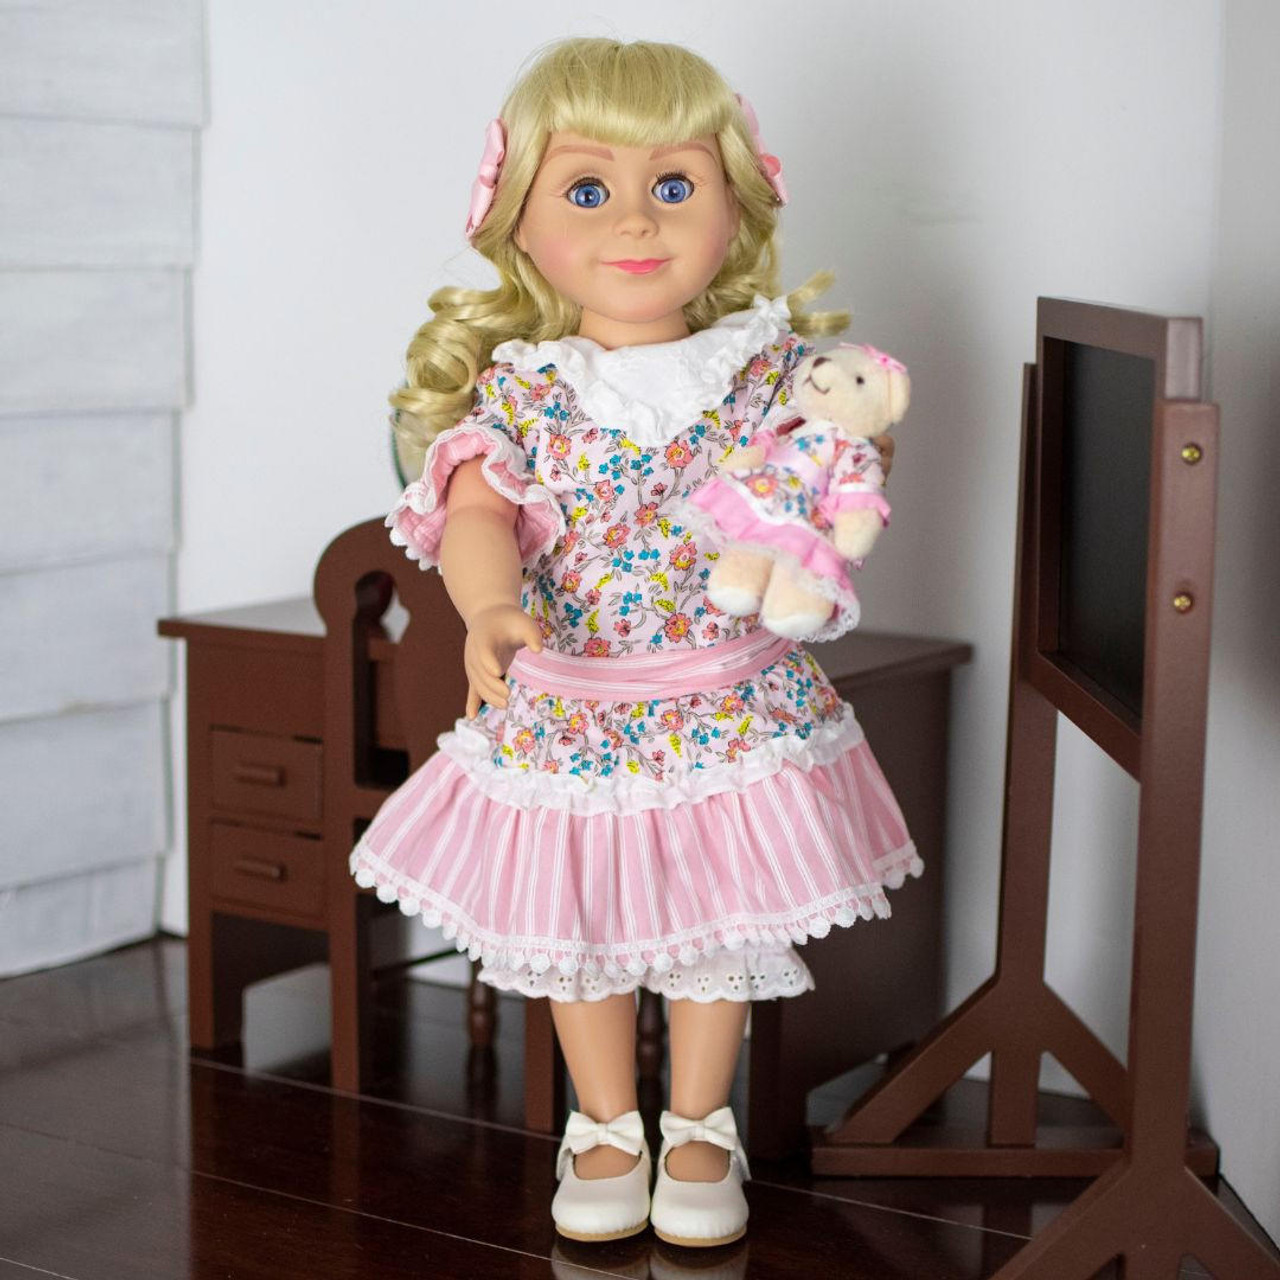 https://cdn11.bigcommerce.com/s-m5vcu70215/images/stencil/1280x1280/products/248/2466/the-queens-treasures-little-house-on-the-prairie-nellie-oleson-18-inch-doll__62971.1692302407.jpg?c=1